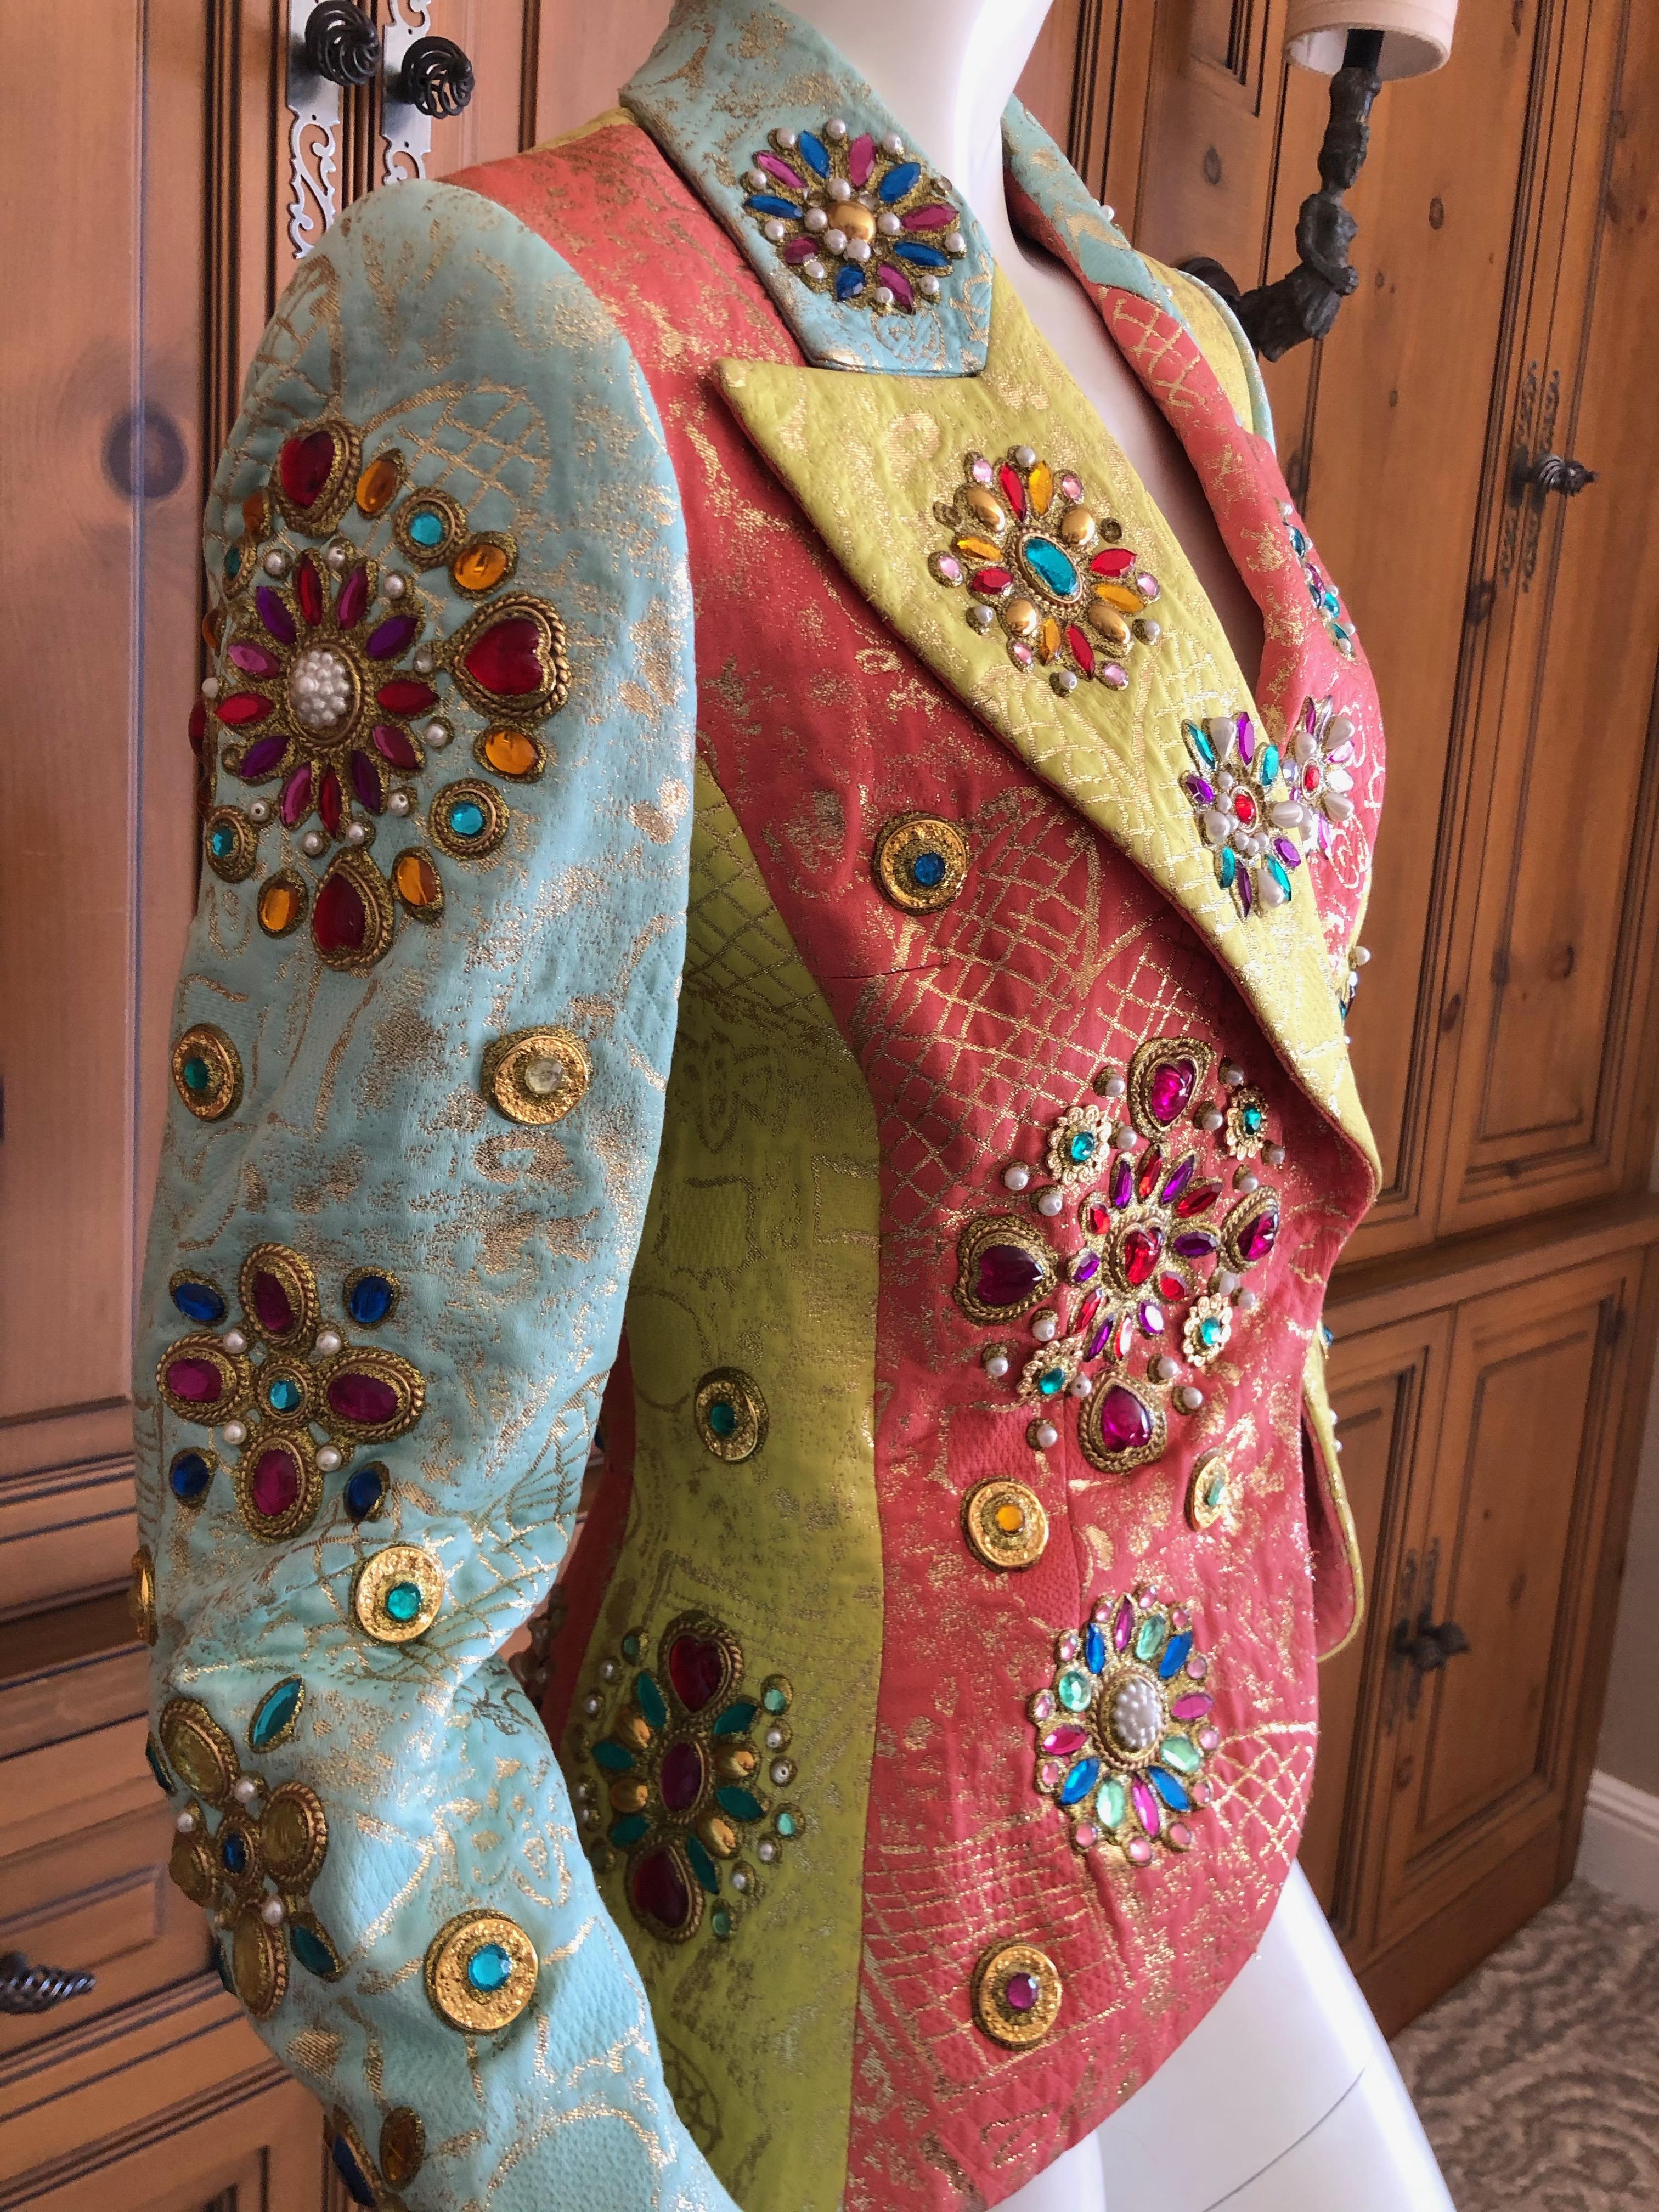 Christian Lacroix Exuberant Vintage Jeweled Silk Blazer.
This is amazing, embellished with crystal and pearl 